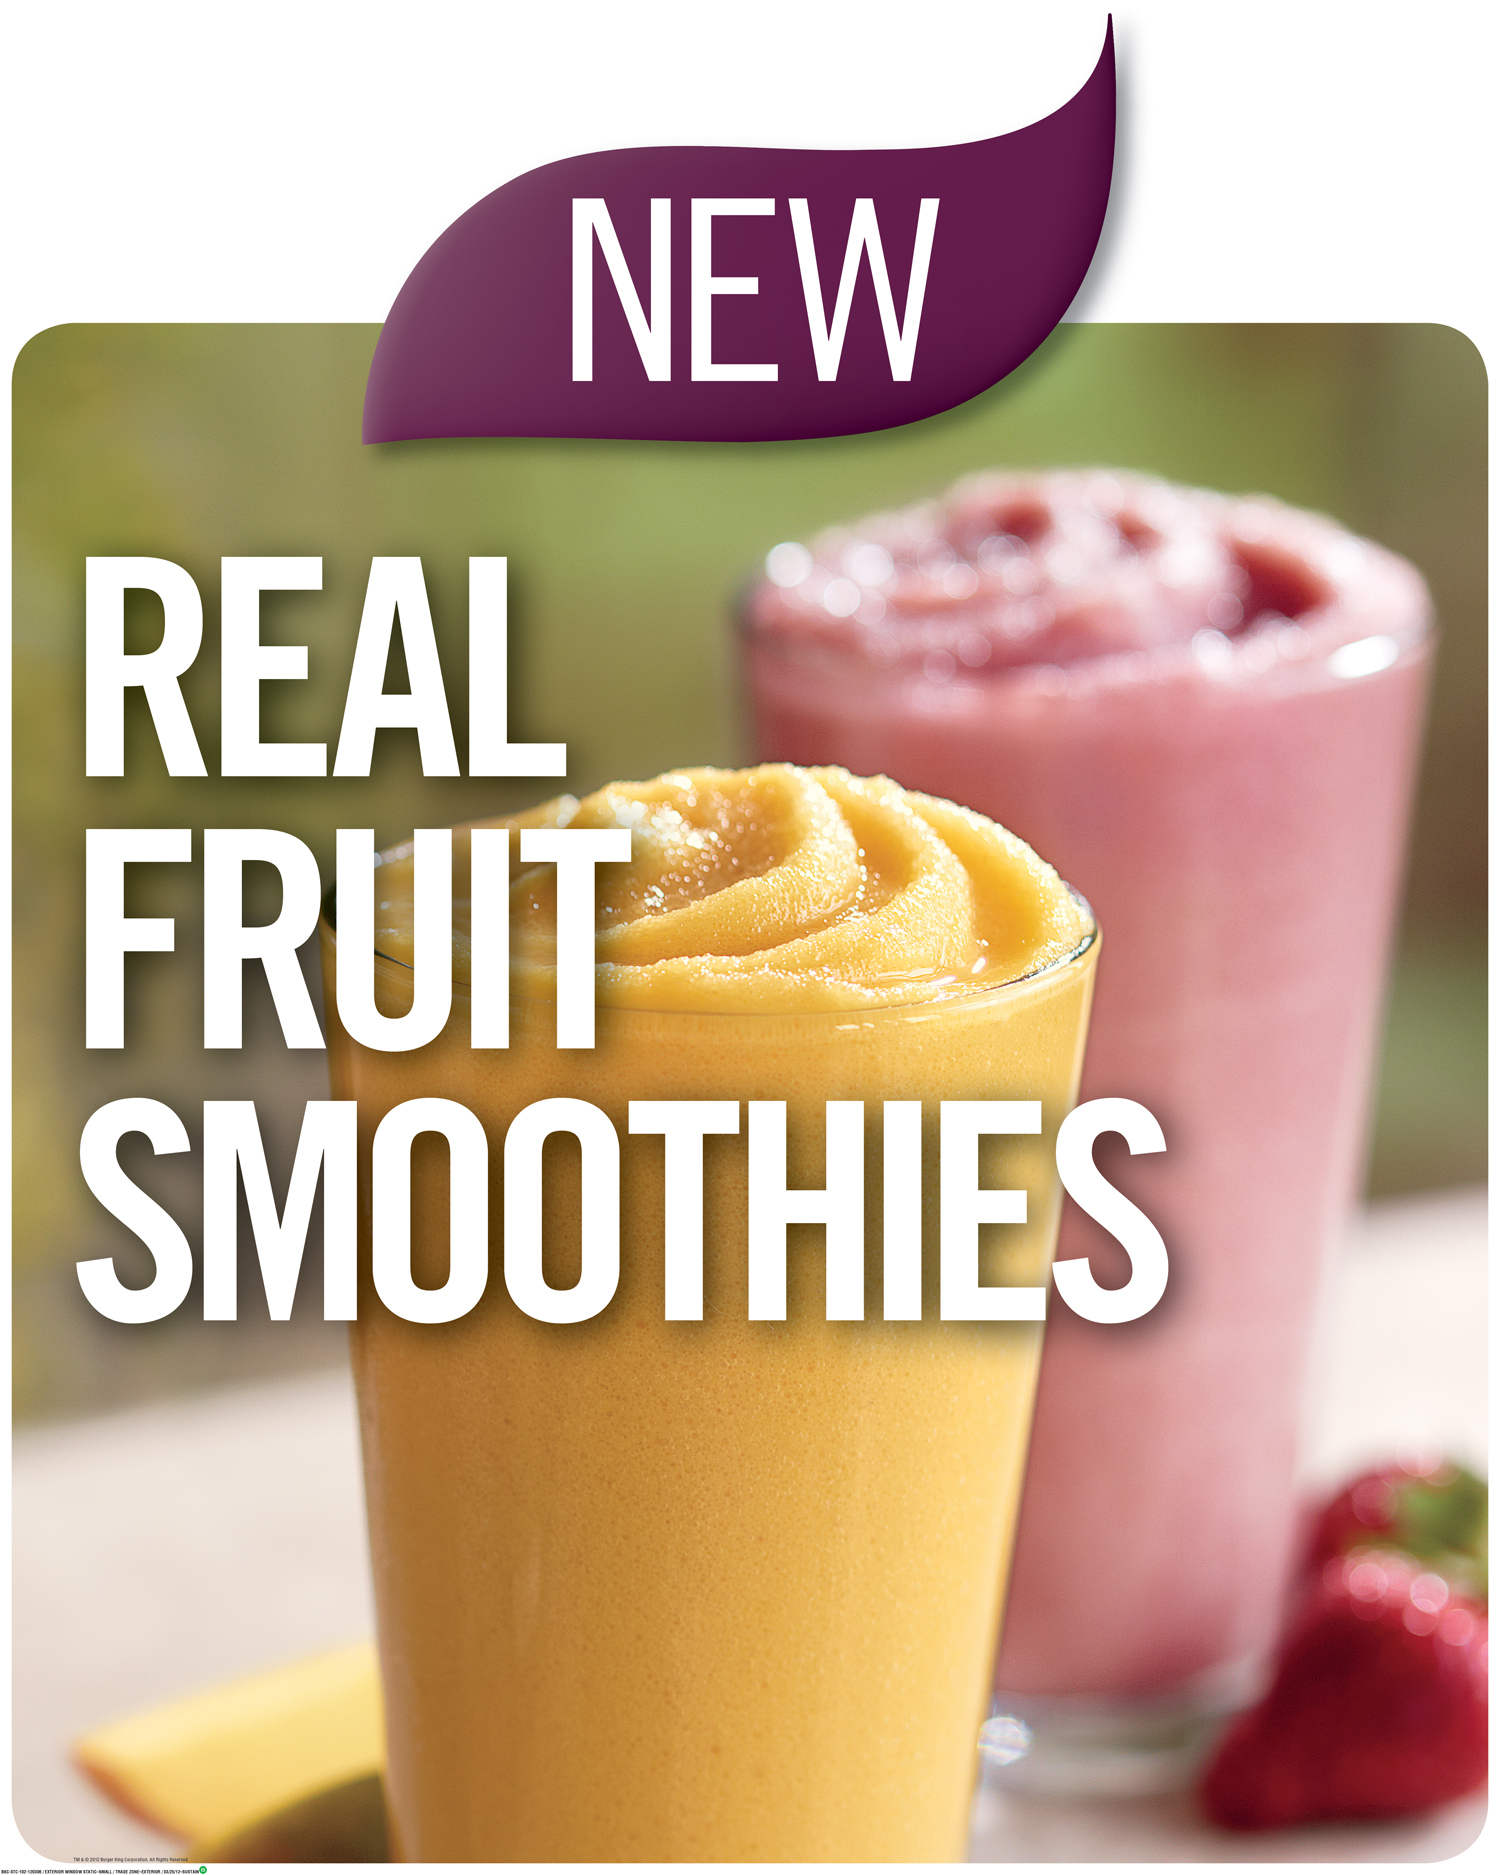 Burger King Offering $1 Smoothies This Labor Day Weekend : Franchise ...